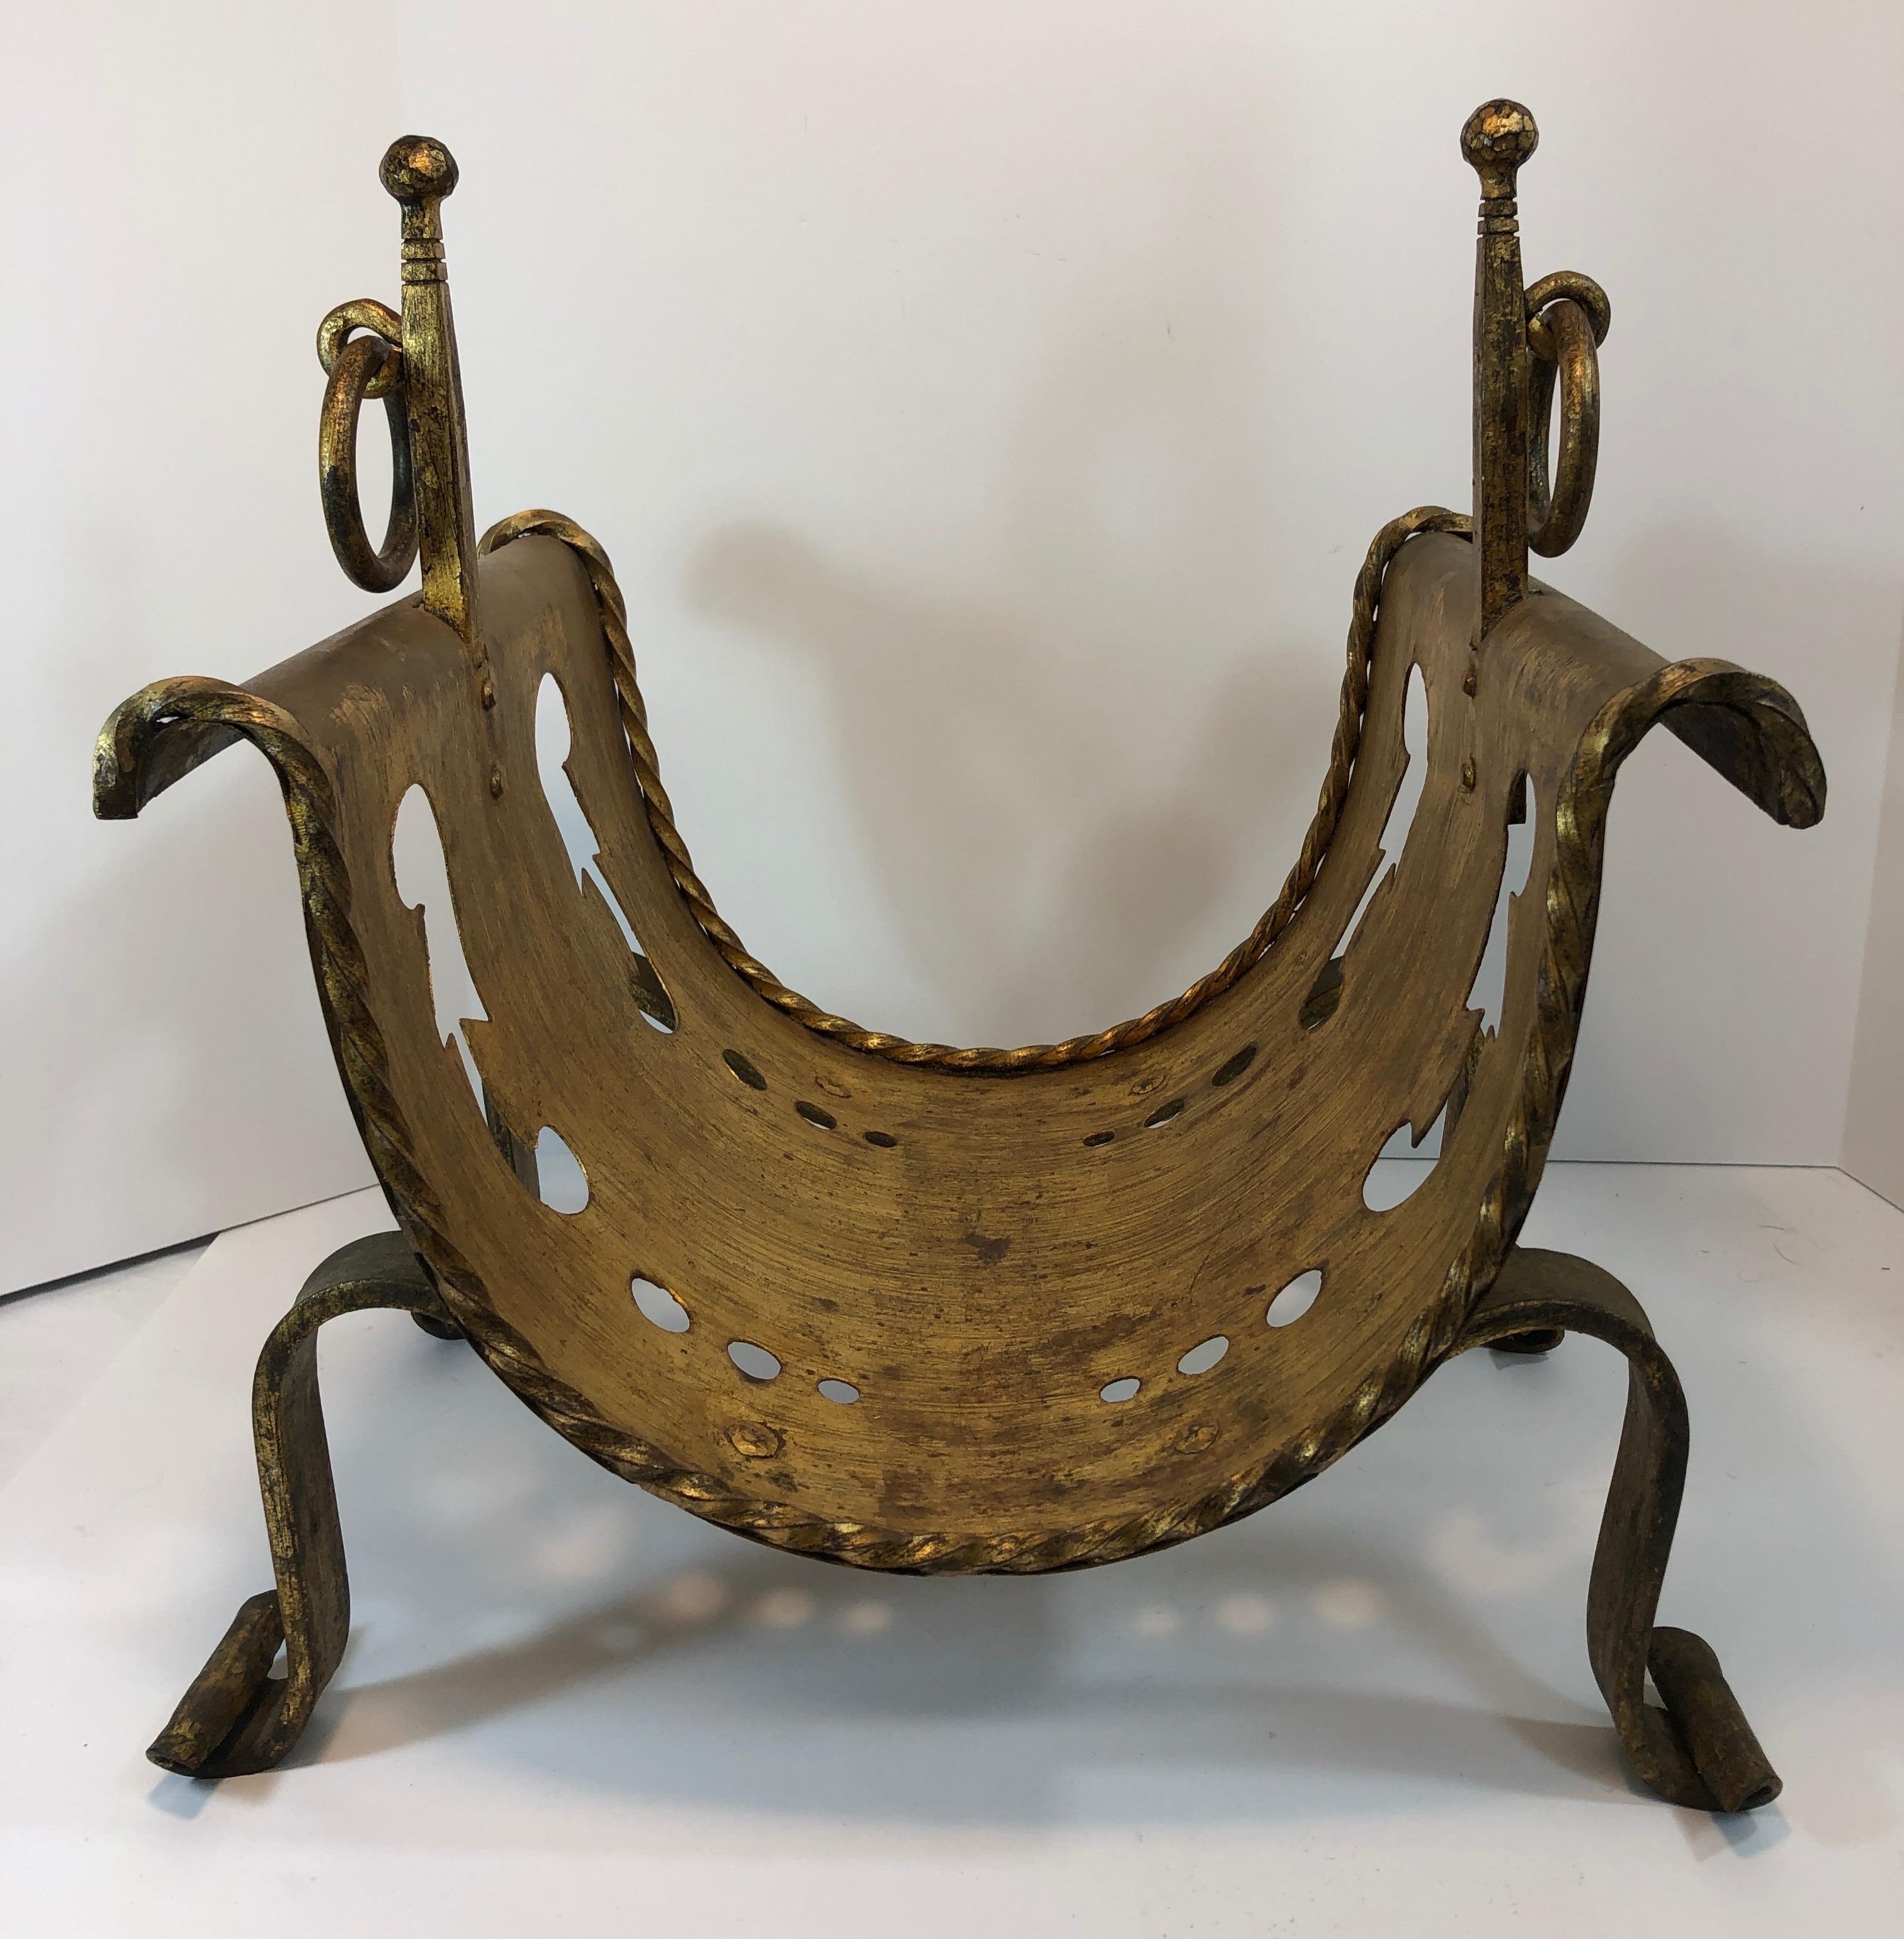 Gilt iron log holder or magazine rack. Very good overall condition for age, slight dark areas at bottom where logs or magazines would sit.